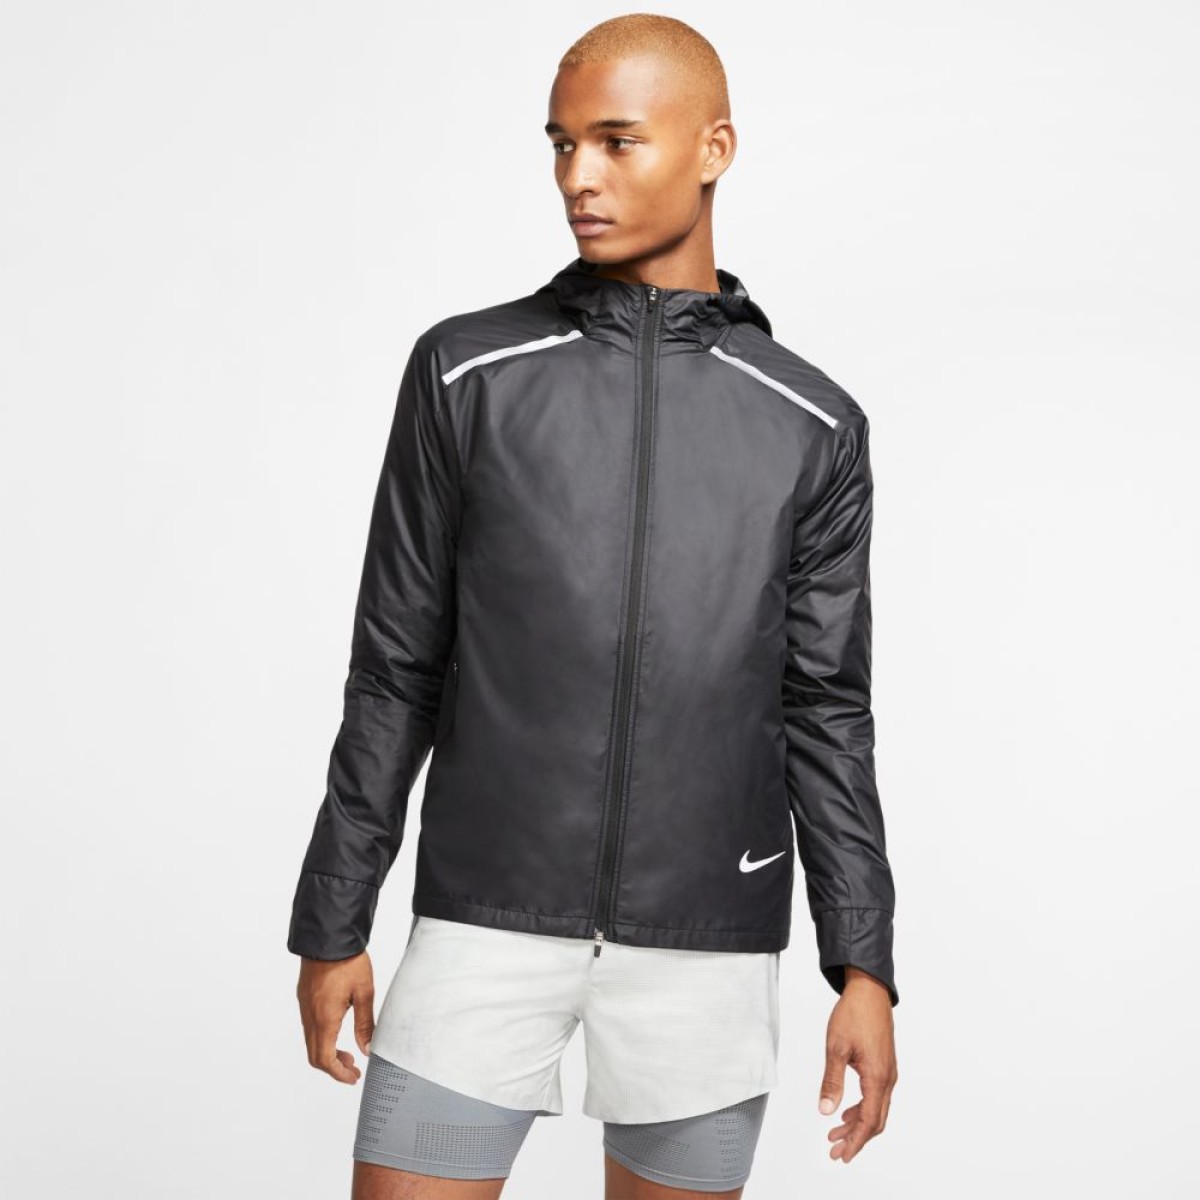 Don't let a little rain dampen your route. The Nike Repel Jacket zips ...